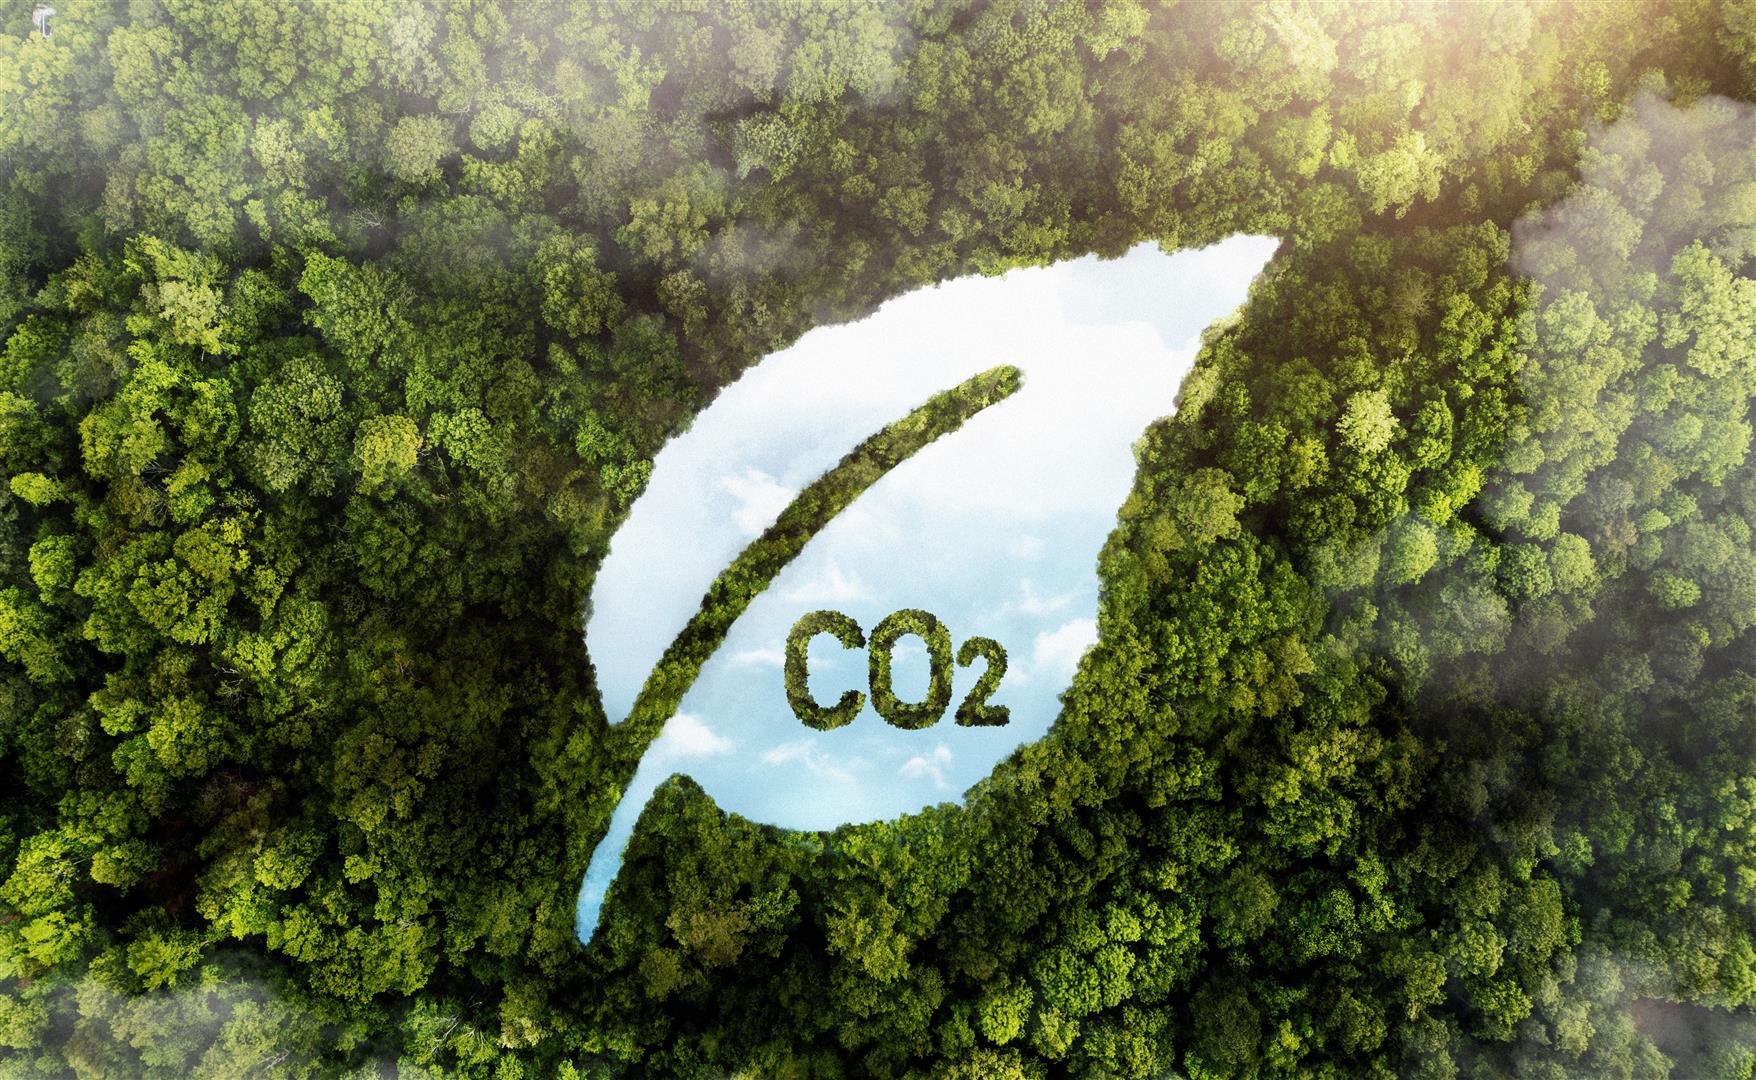 “Alone-Group” entrepreneurs accumulating carbon credits to pave the way for business growth